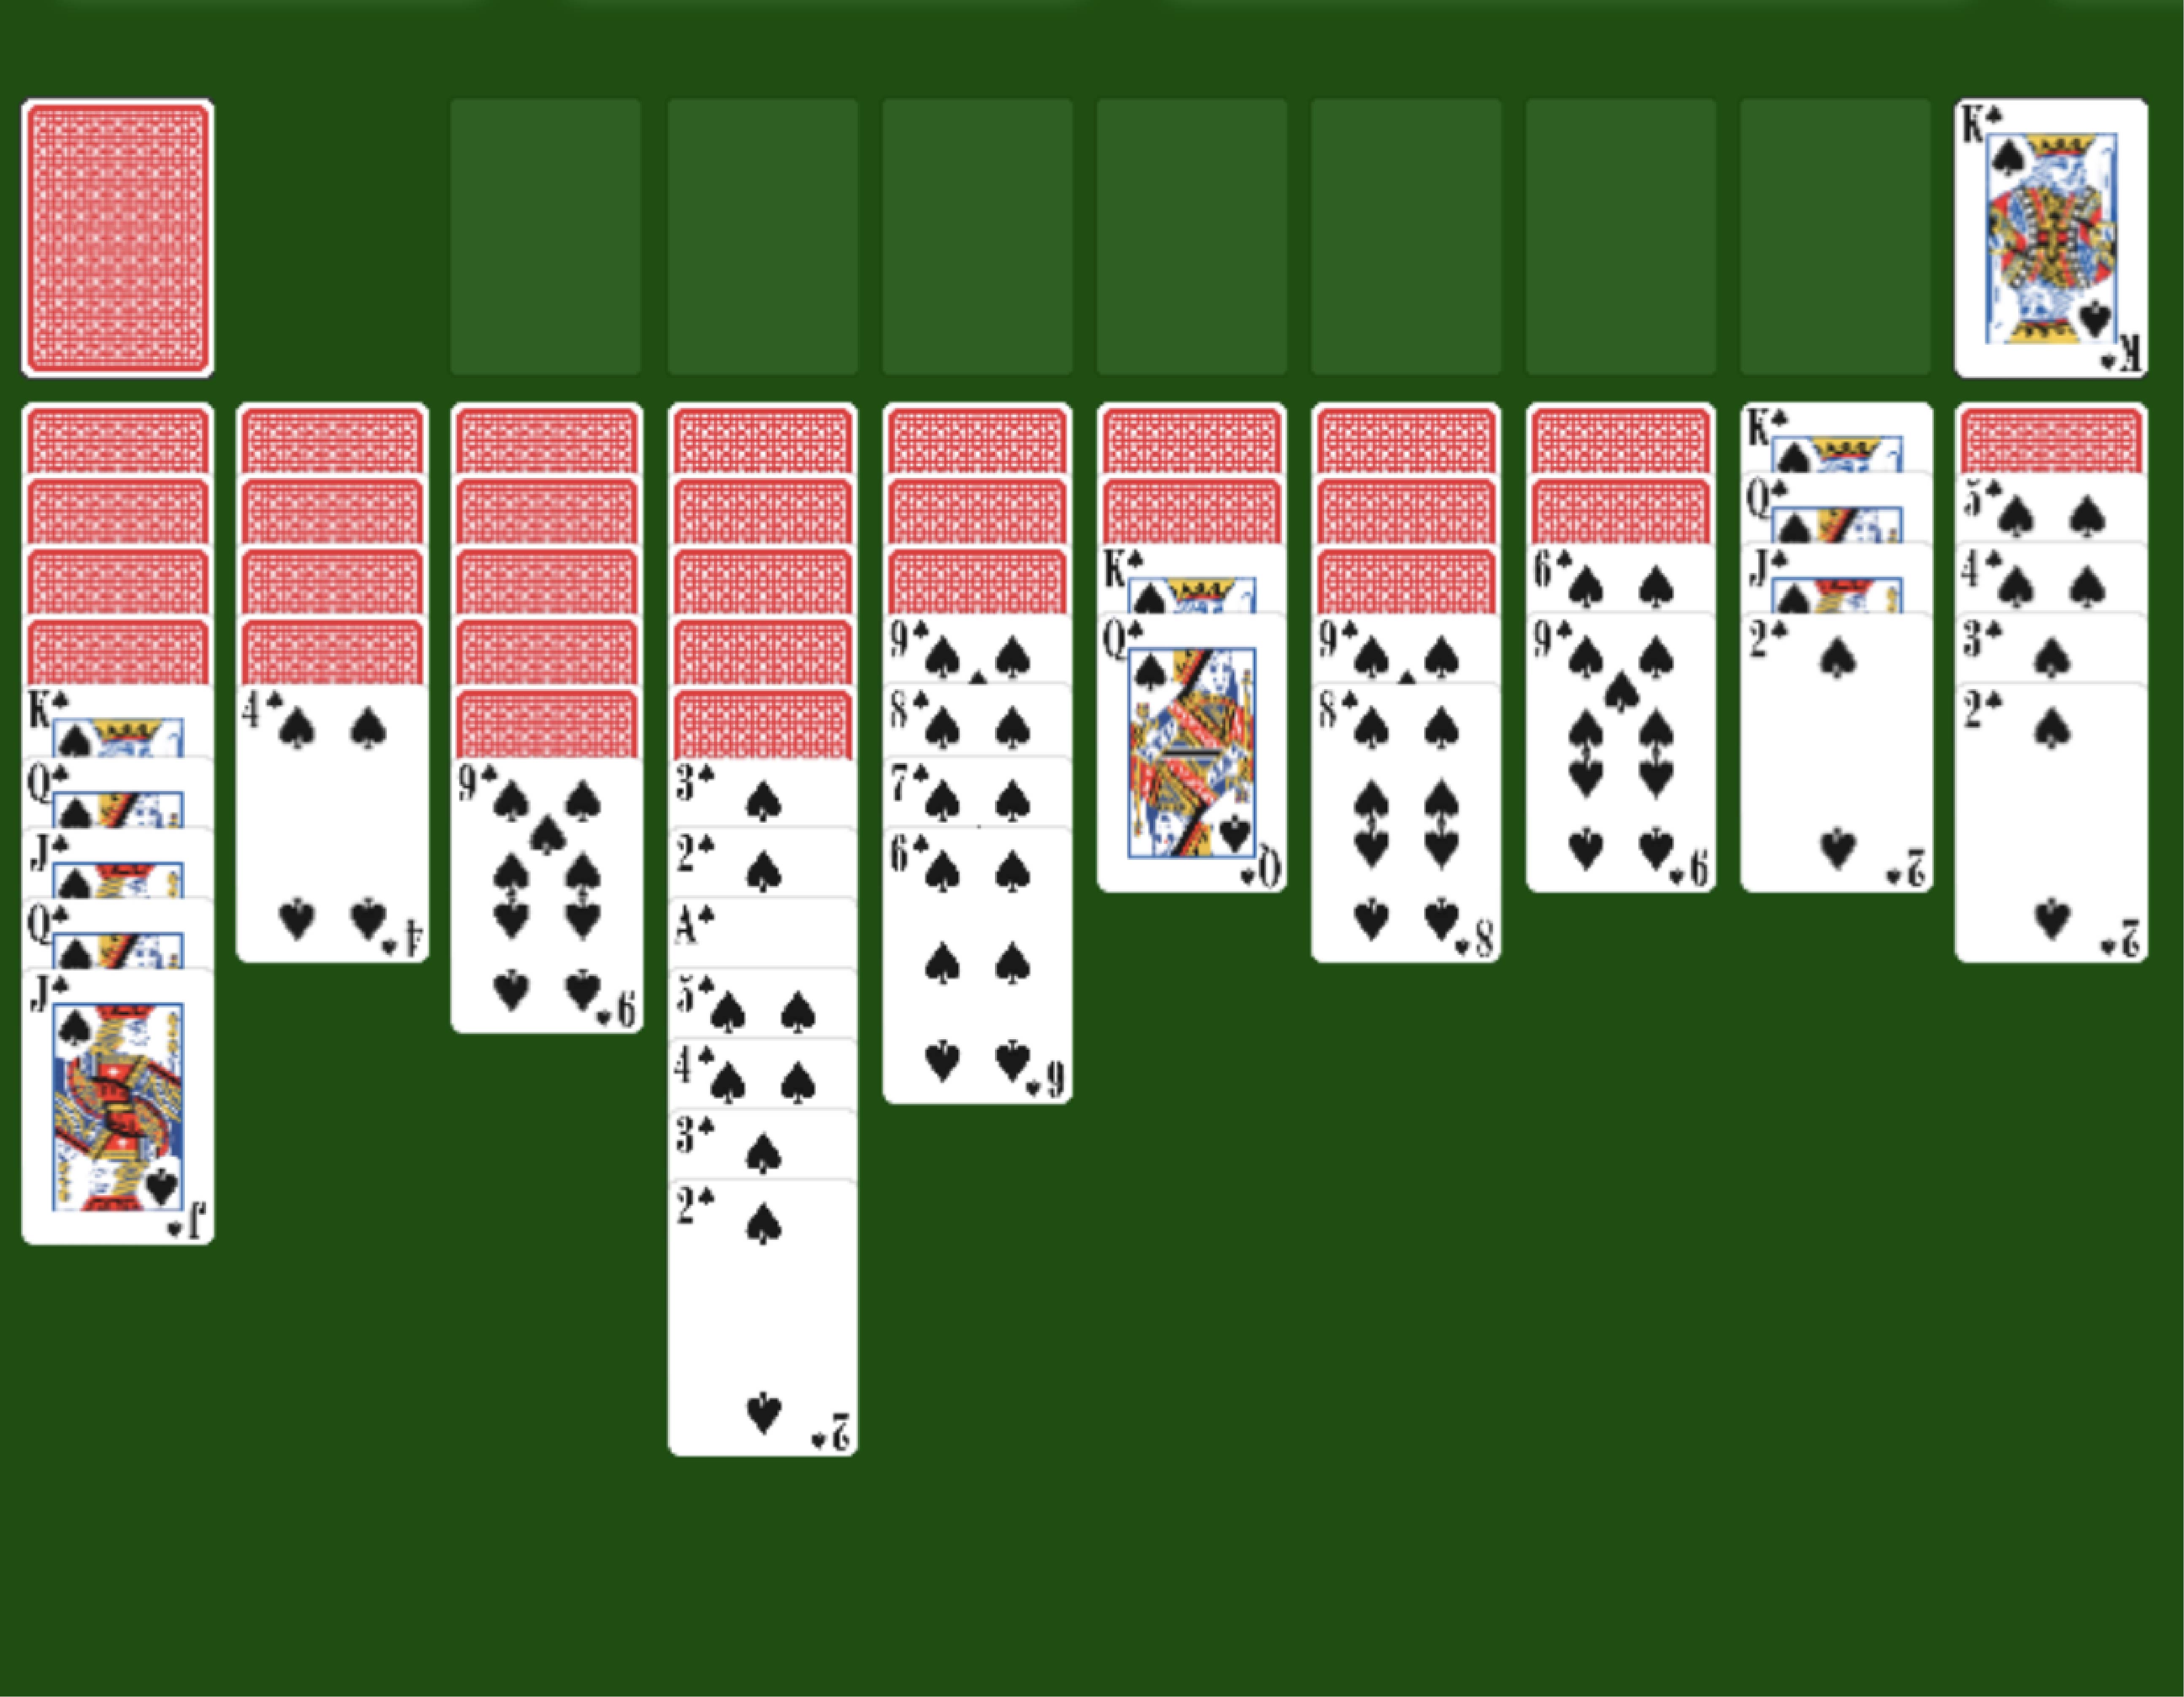 spider solitaire 2 suit game free download